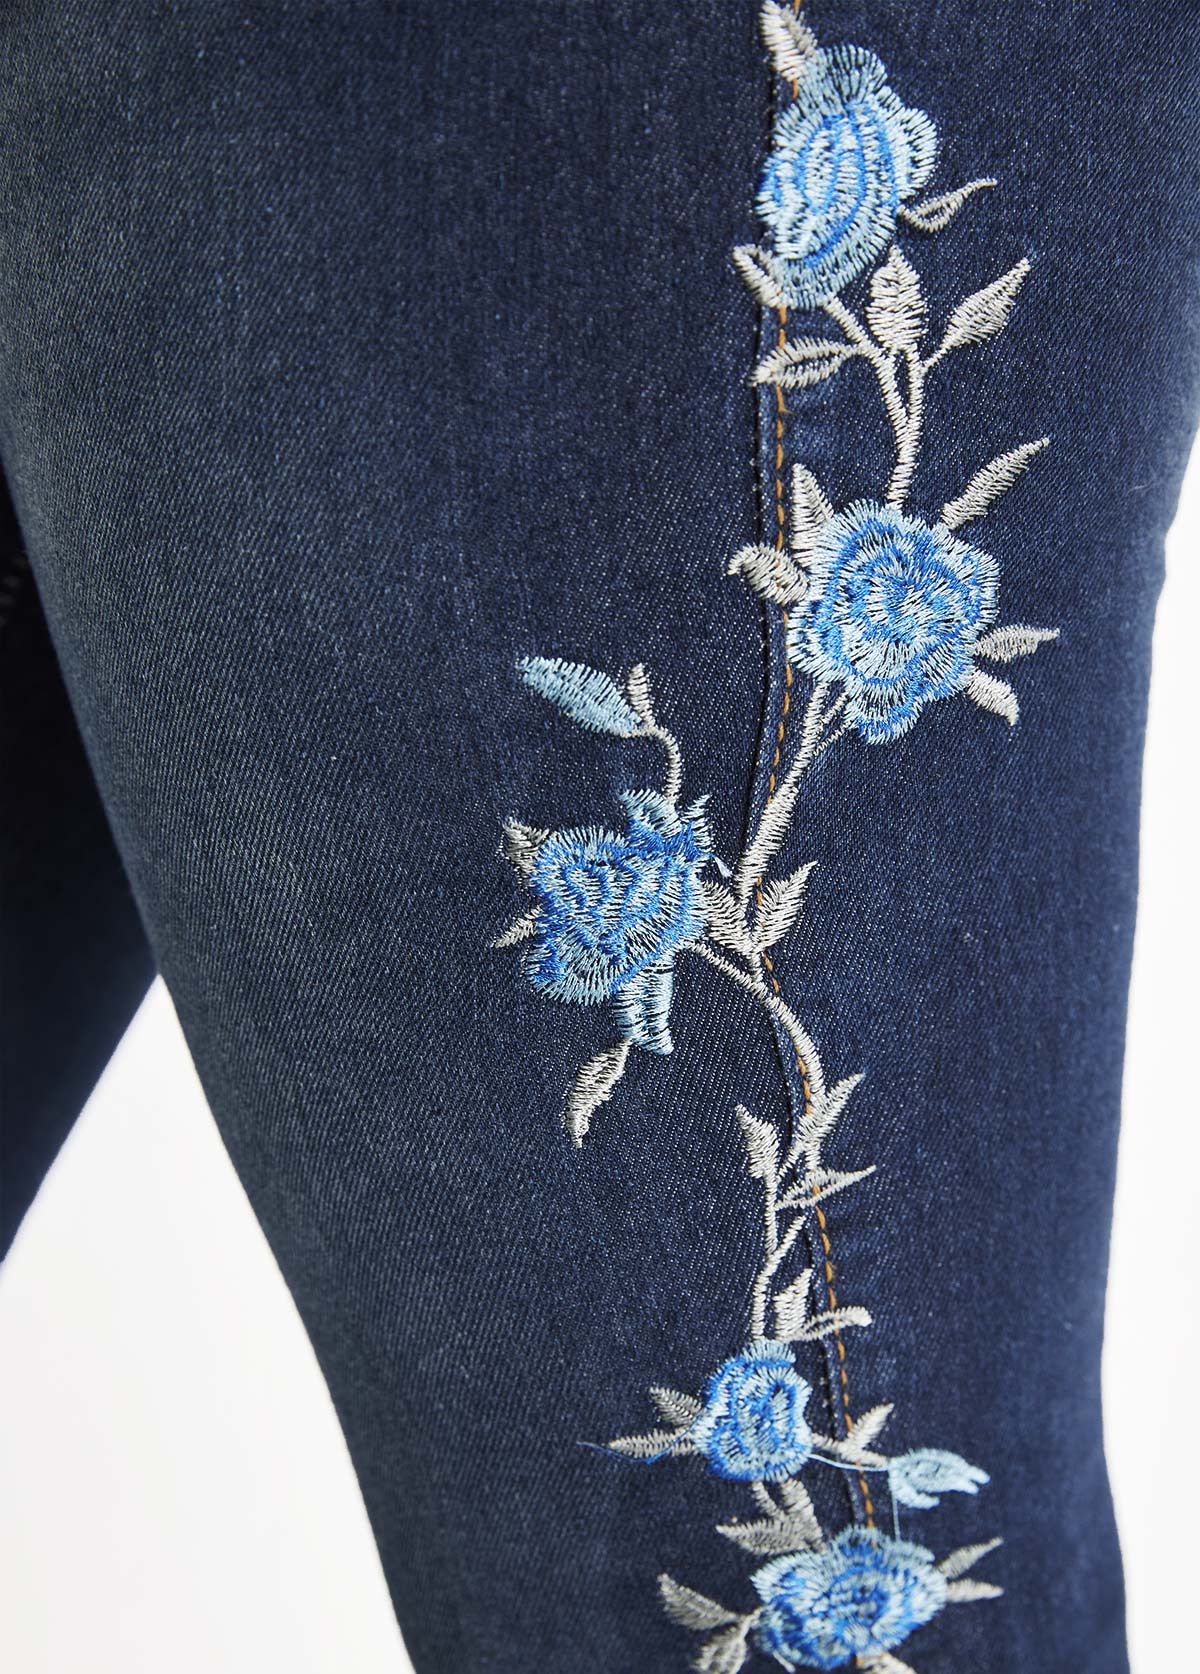 Floral Print Embroidery Denim Blue Skinny Zipper Fly Jeans